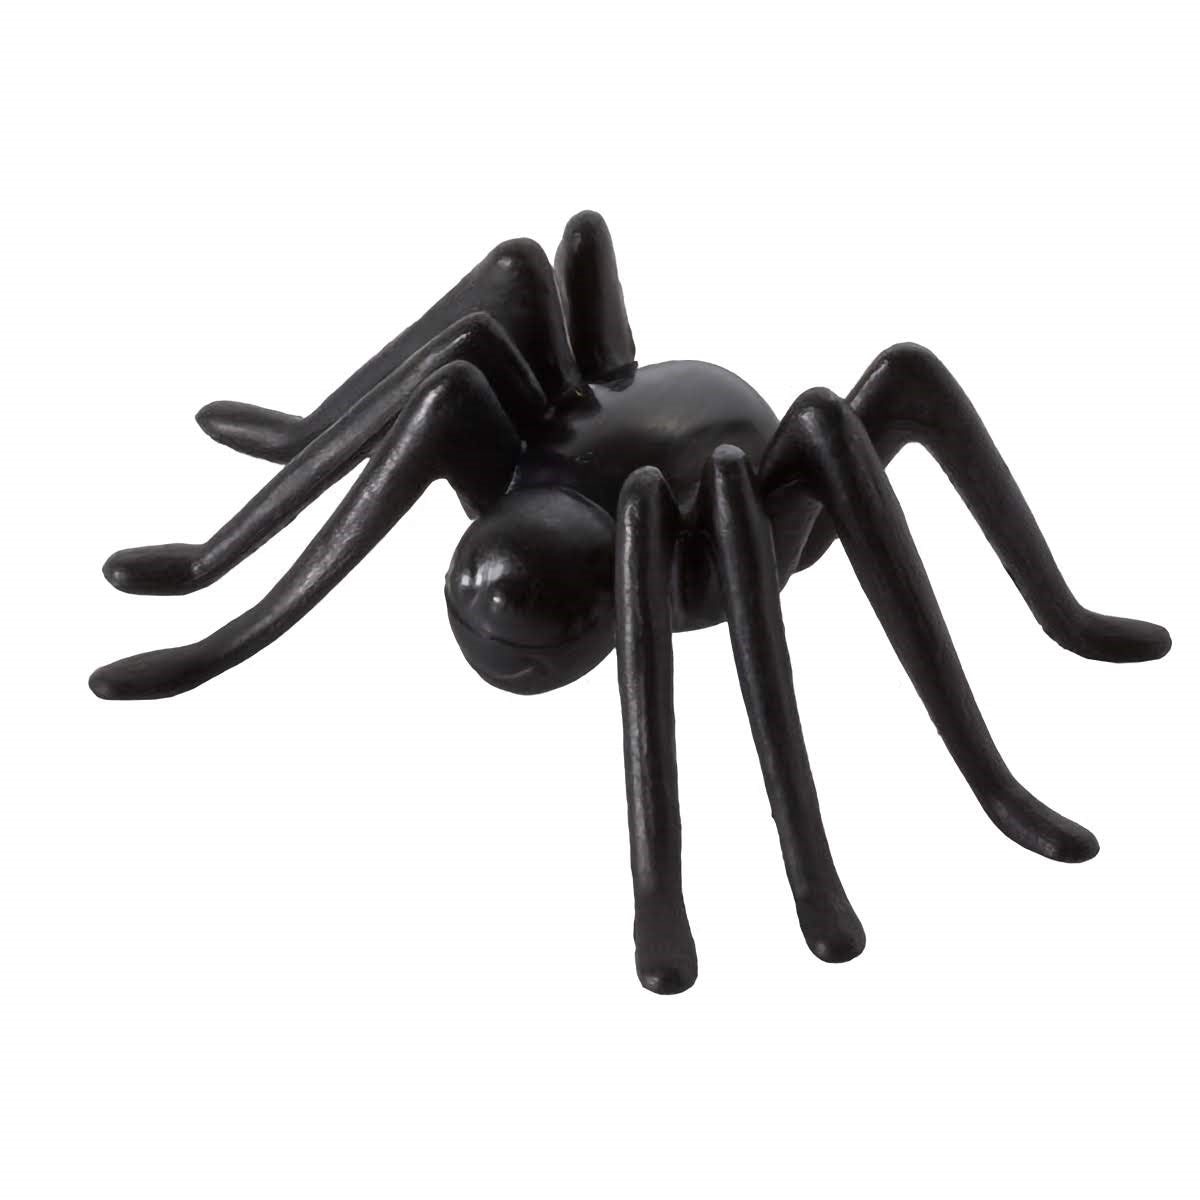 An eerily realistic spider cake topper, crafted with meticulous attention to detail, from its glossy black body to its eight slender legs poised to skitter. This lifelike arachnid is perfect for Halloween celebrations, spooky-themed birthday parties, or to top treats at an insect-themed educational event.